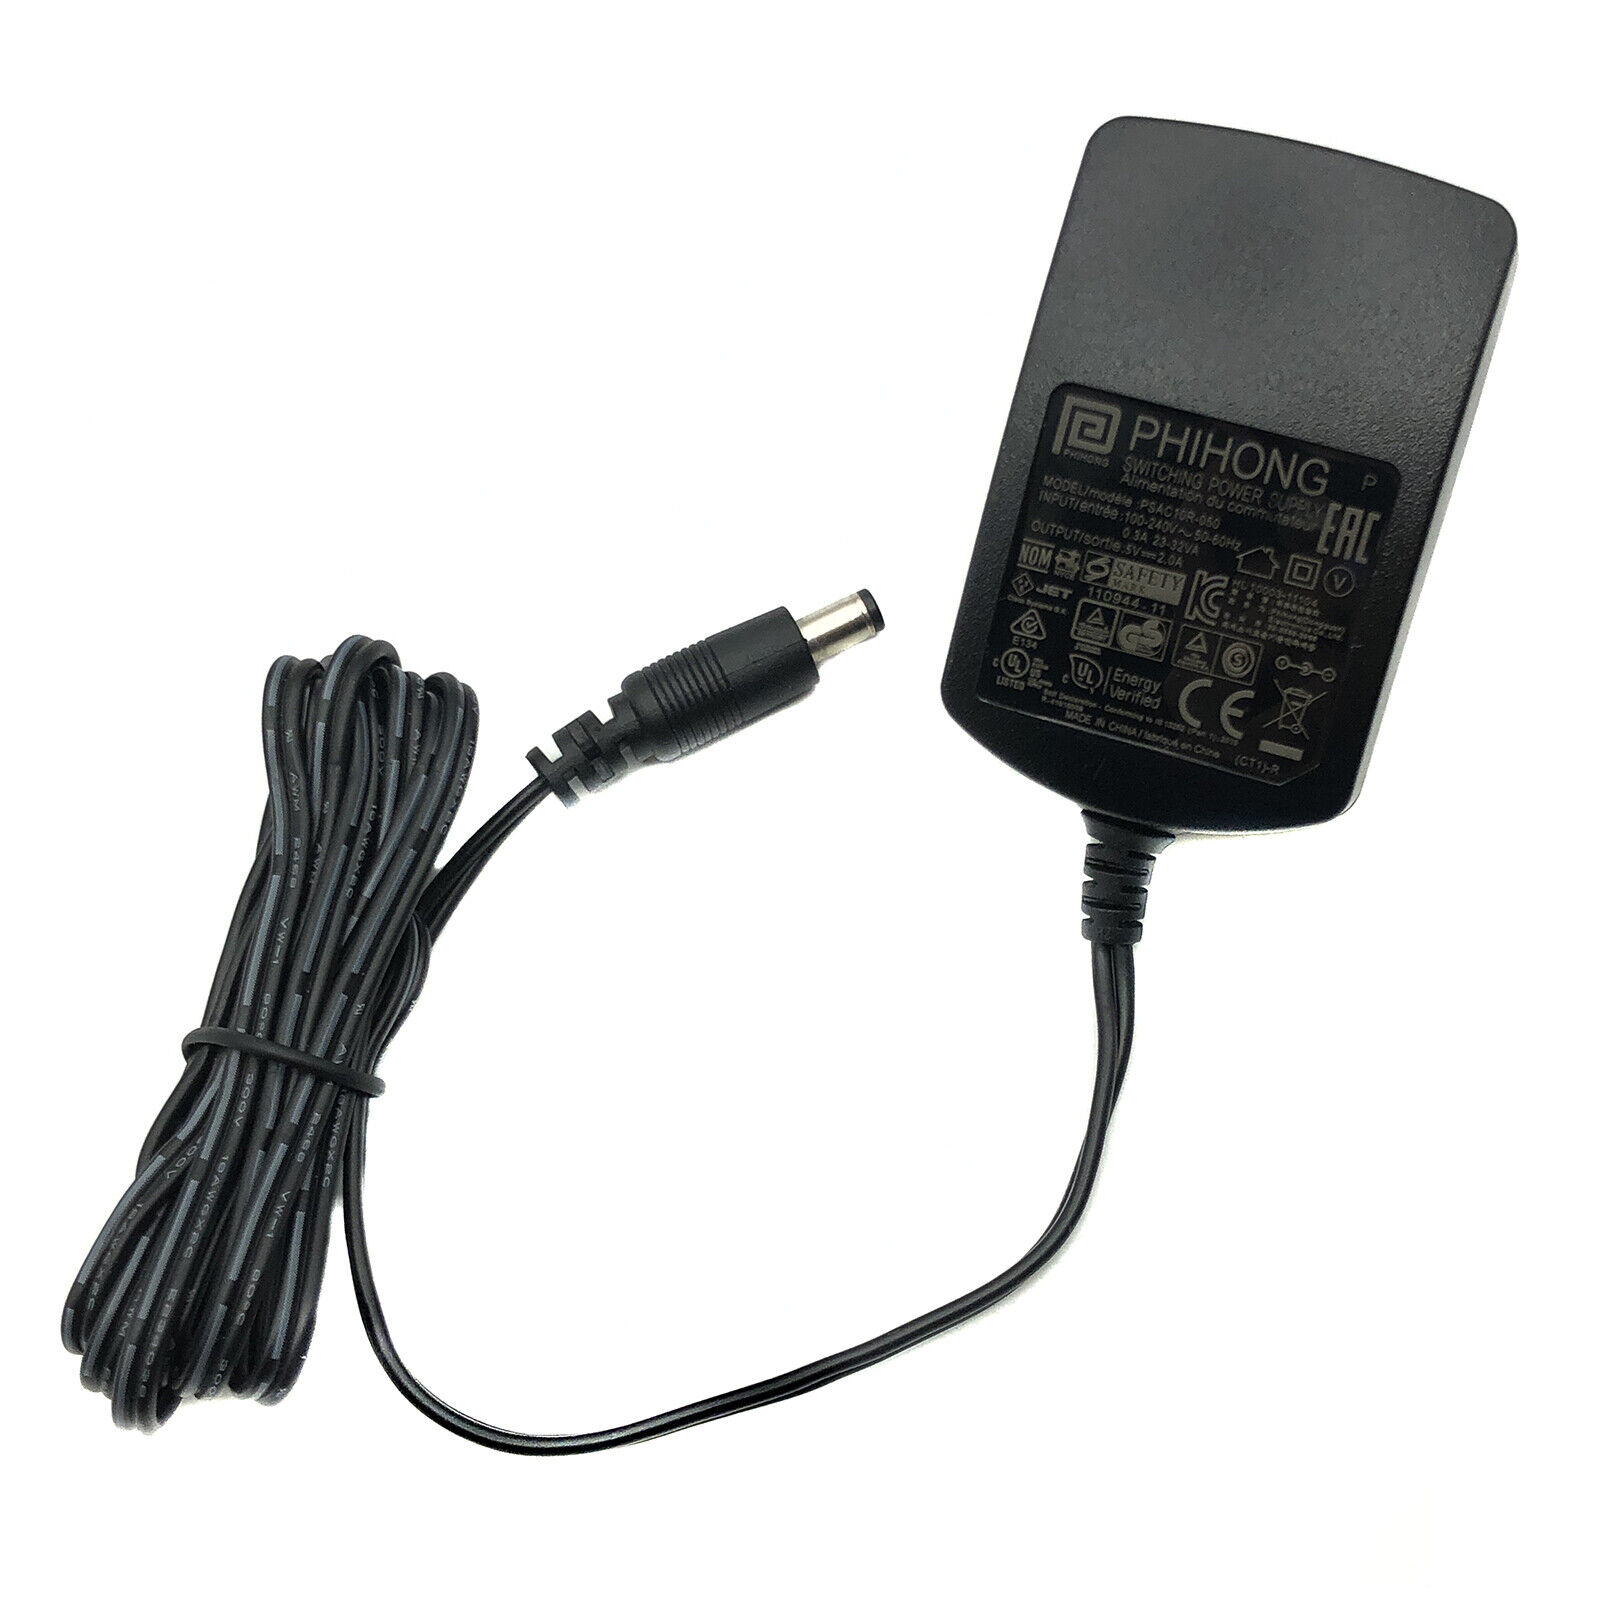 OEM Phihong Switching Power Supply for Fanvil X4 X5 X6 X7 Enterprise IP Phone